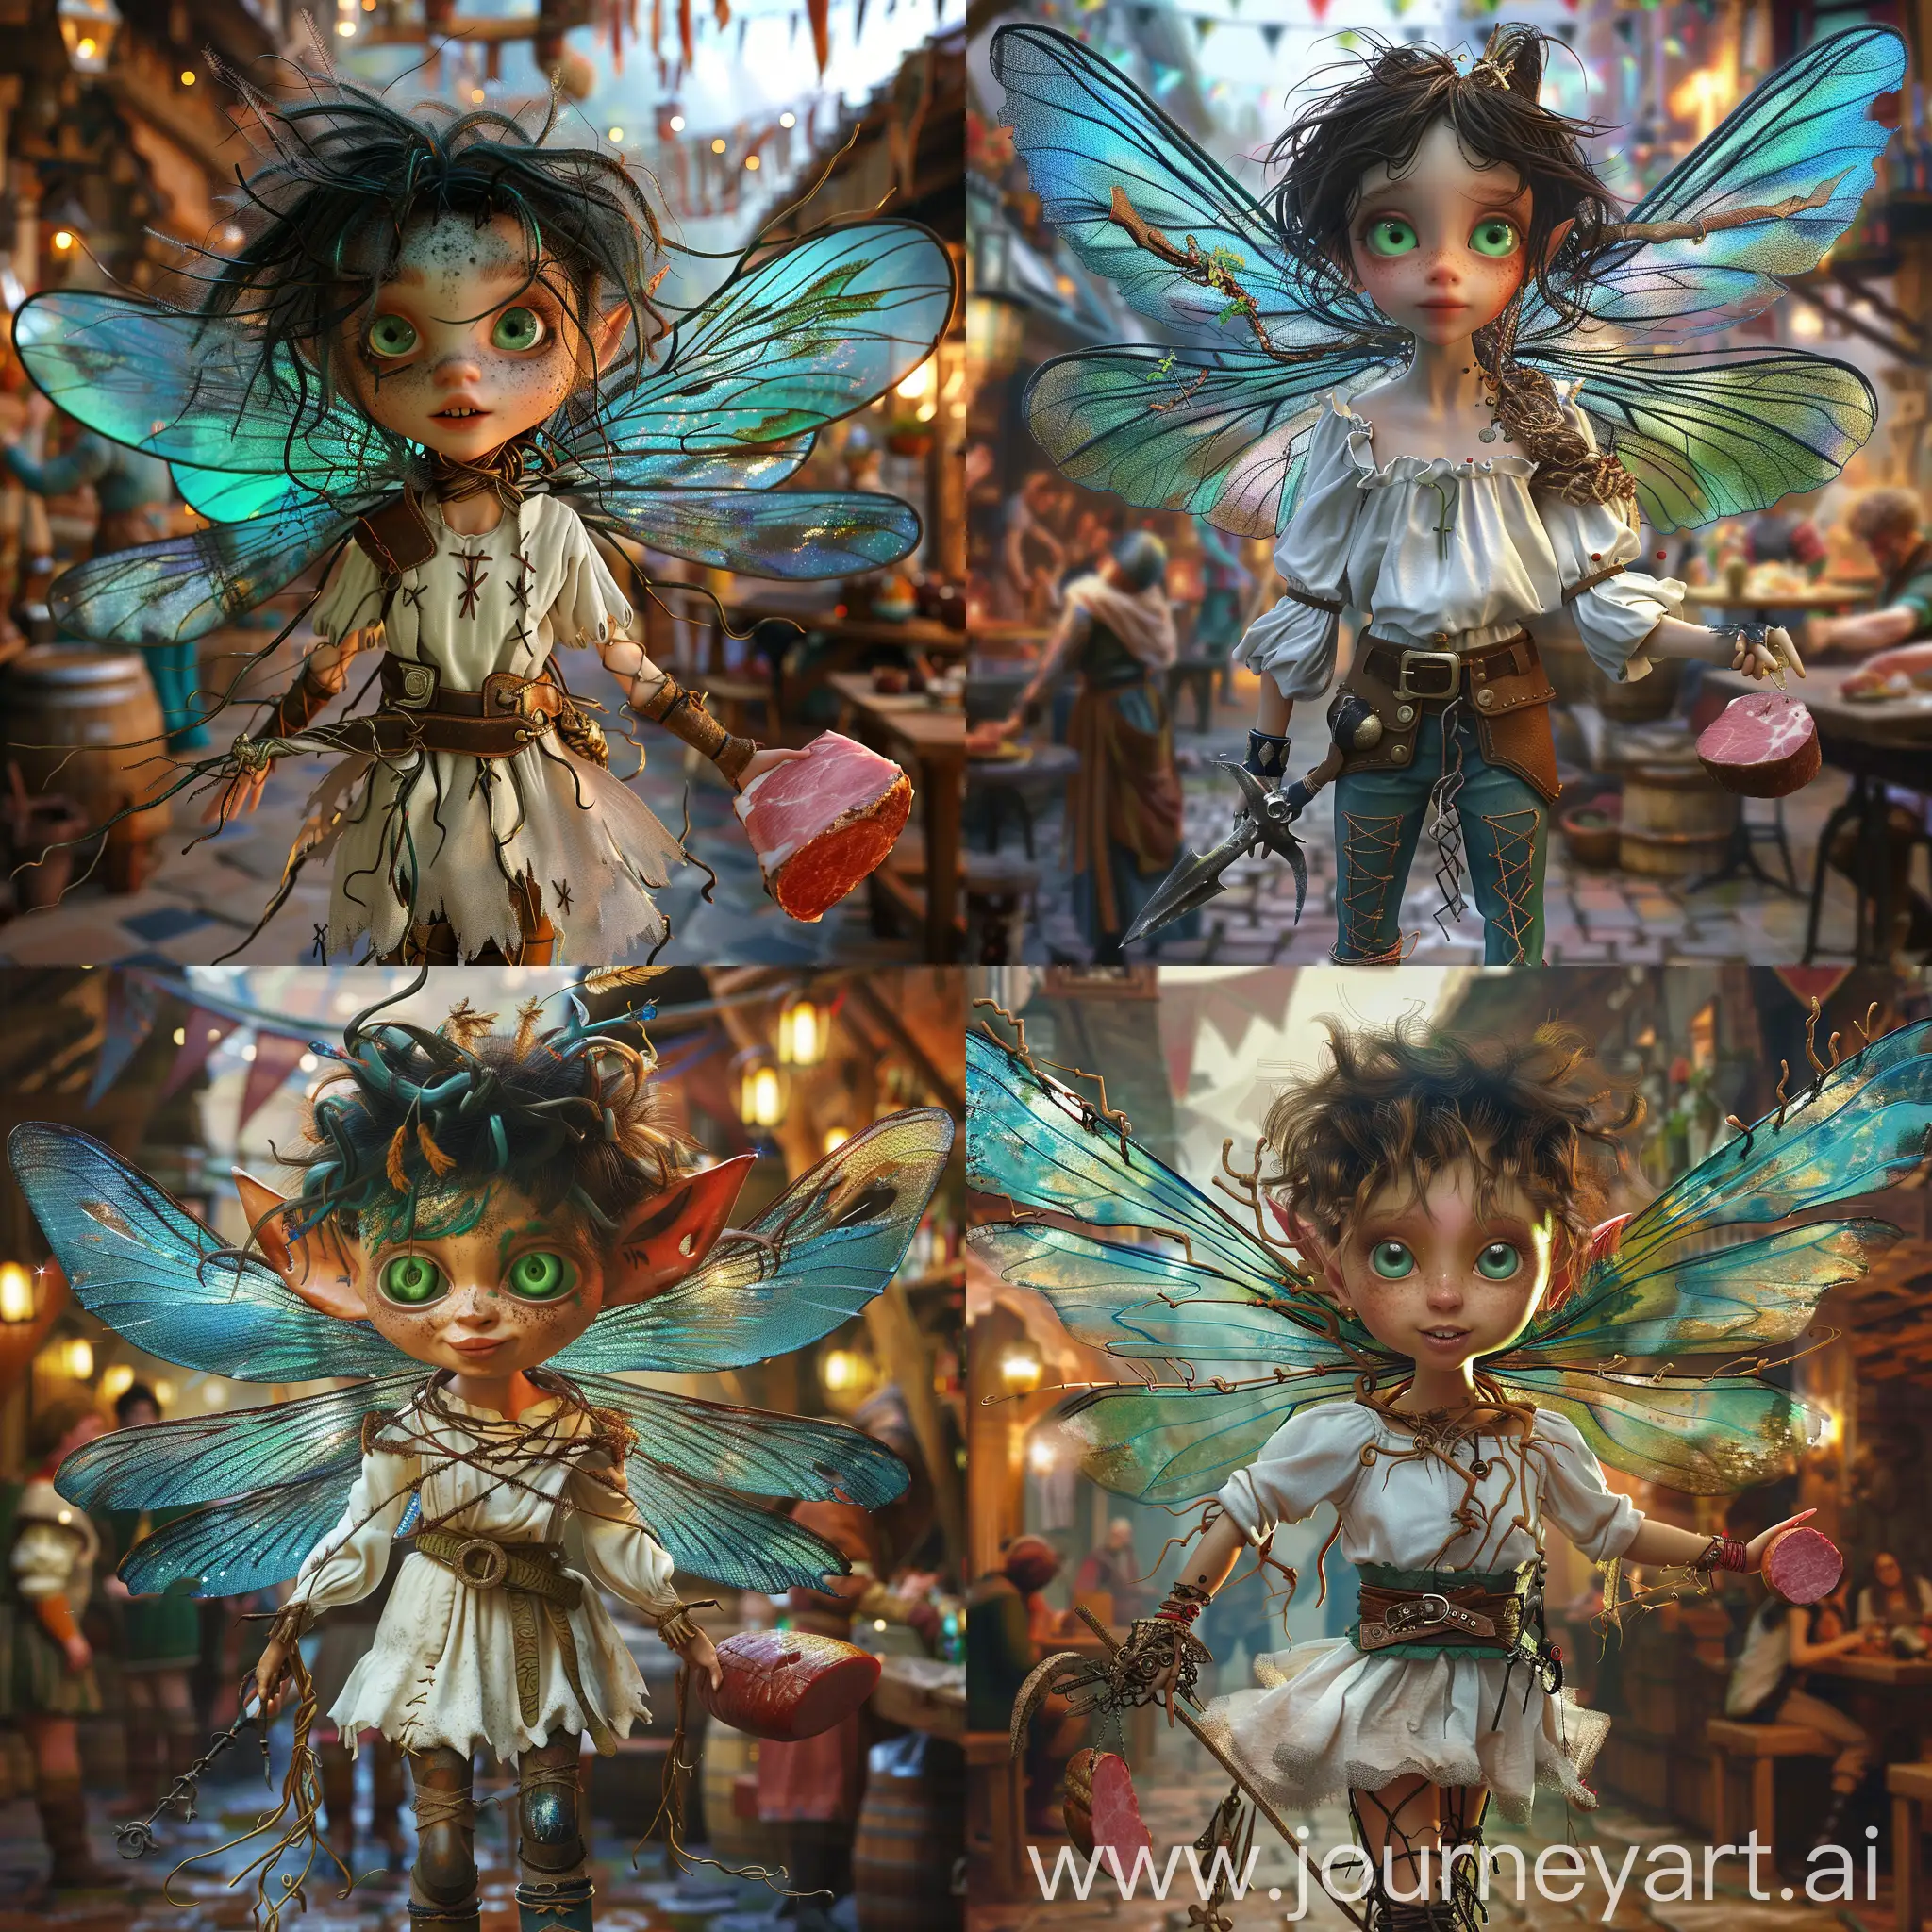 fairy girl, beautiful large dragonfly wings of blue and green, wings look like a tangle of branches and leaves, has awkward and chaotic patterns on the wings, medieval clothes resemble a boy's clothes, wears her small sword more like a tangle of roots and metal threads on her belt, short ragged haircut mallet with one long curl falling on face, large round emerald eyes with a dark center, eyes full of joy and fun, eyes decorated with long eyelashes, small nose and round face, has a multicolored shiny skin color that has a slight iridescence, She is dressed in a white medieval shirt with flounces and leather shoulder pads, wears boots with small heels and leather trousers, cinematic lighting, a cheerful expression, flies against the background of a medieval crowded tavern, holds a pork ham in her right hand, looks hungrily and joyfully at a pork ham. Realistic fantasy style